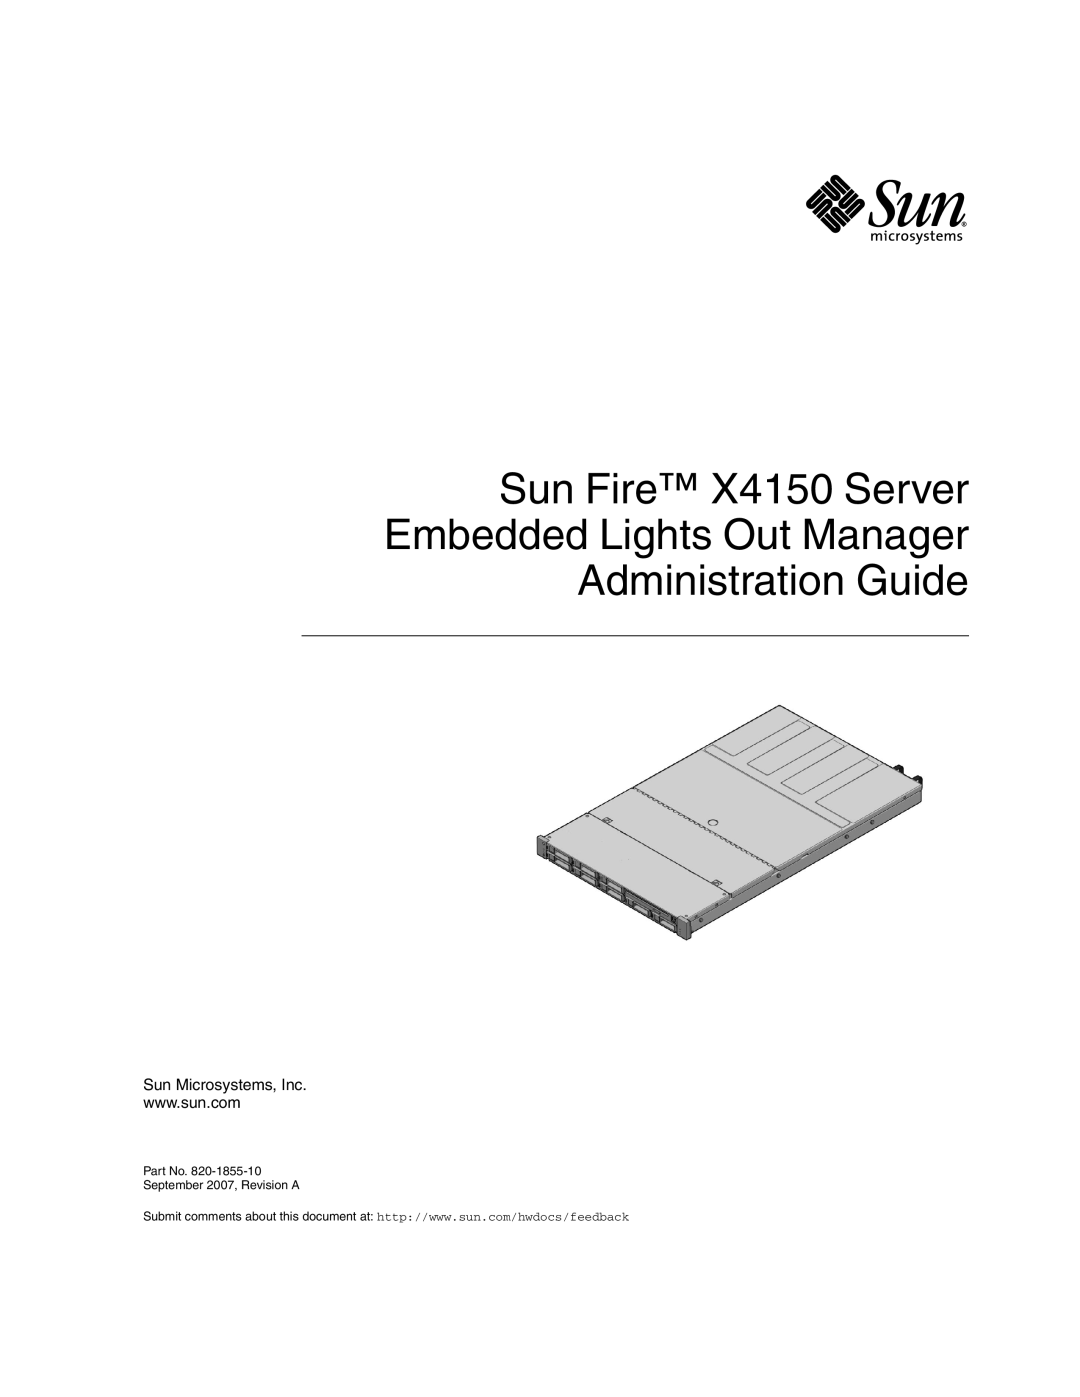 Sun Microsystems manual Sun Fire X4150 Server Embedded Lights Out Manager, Administration Guide, Sun Microsystems, Inc 